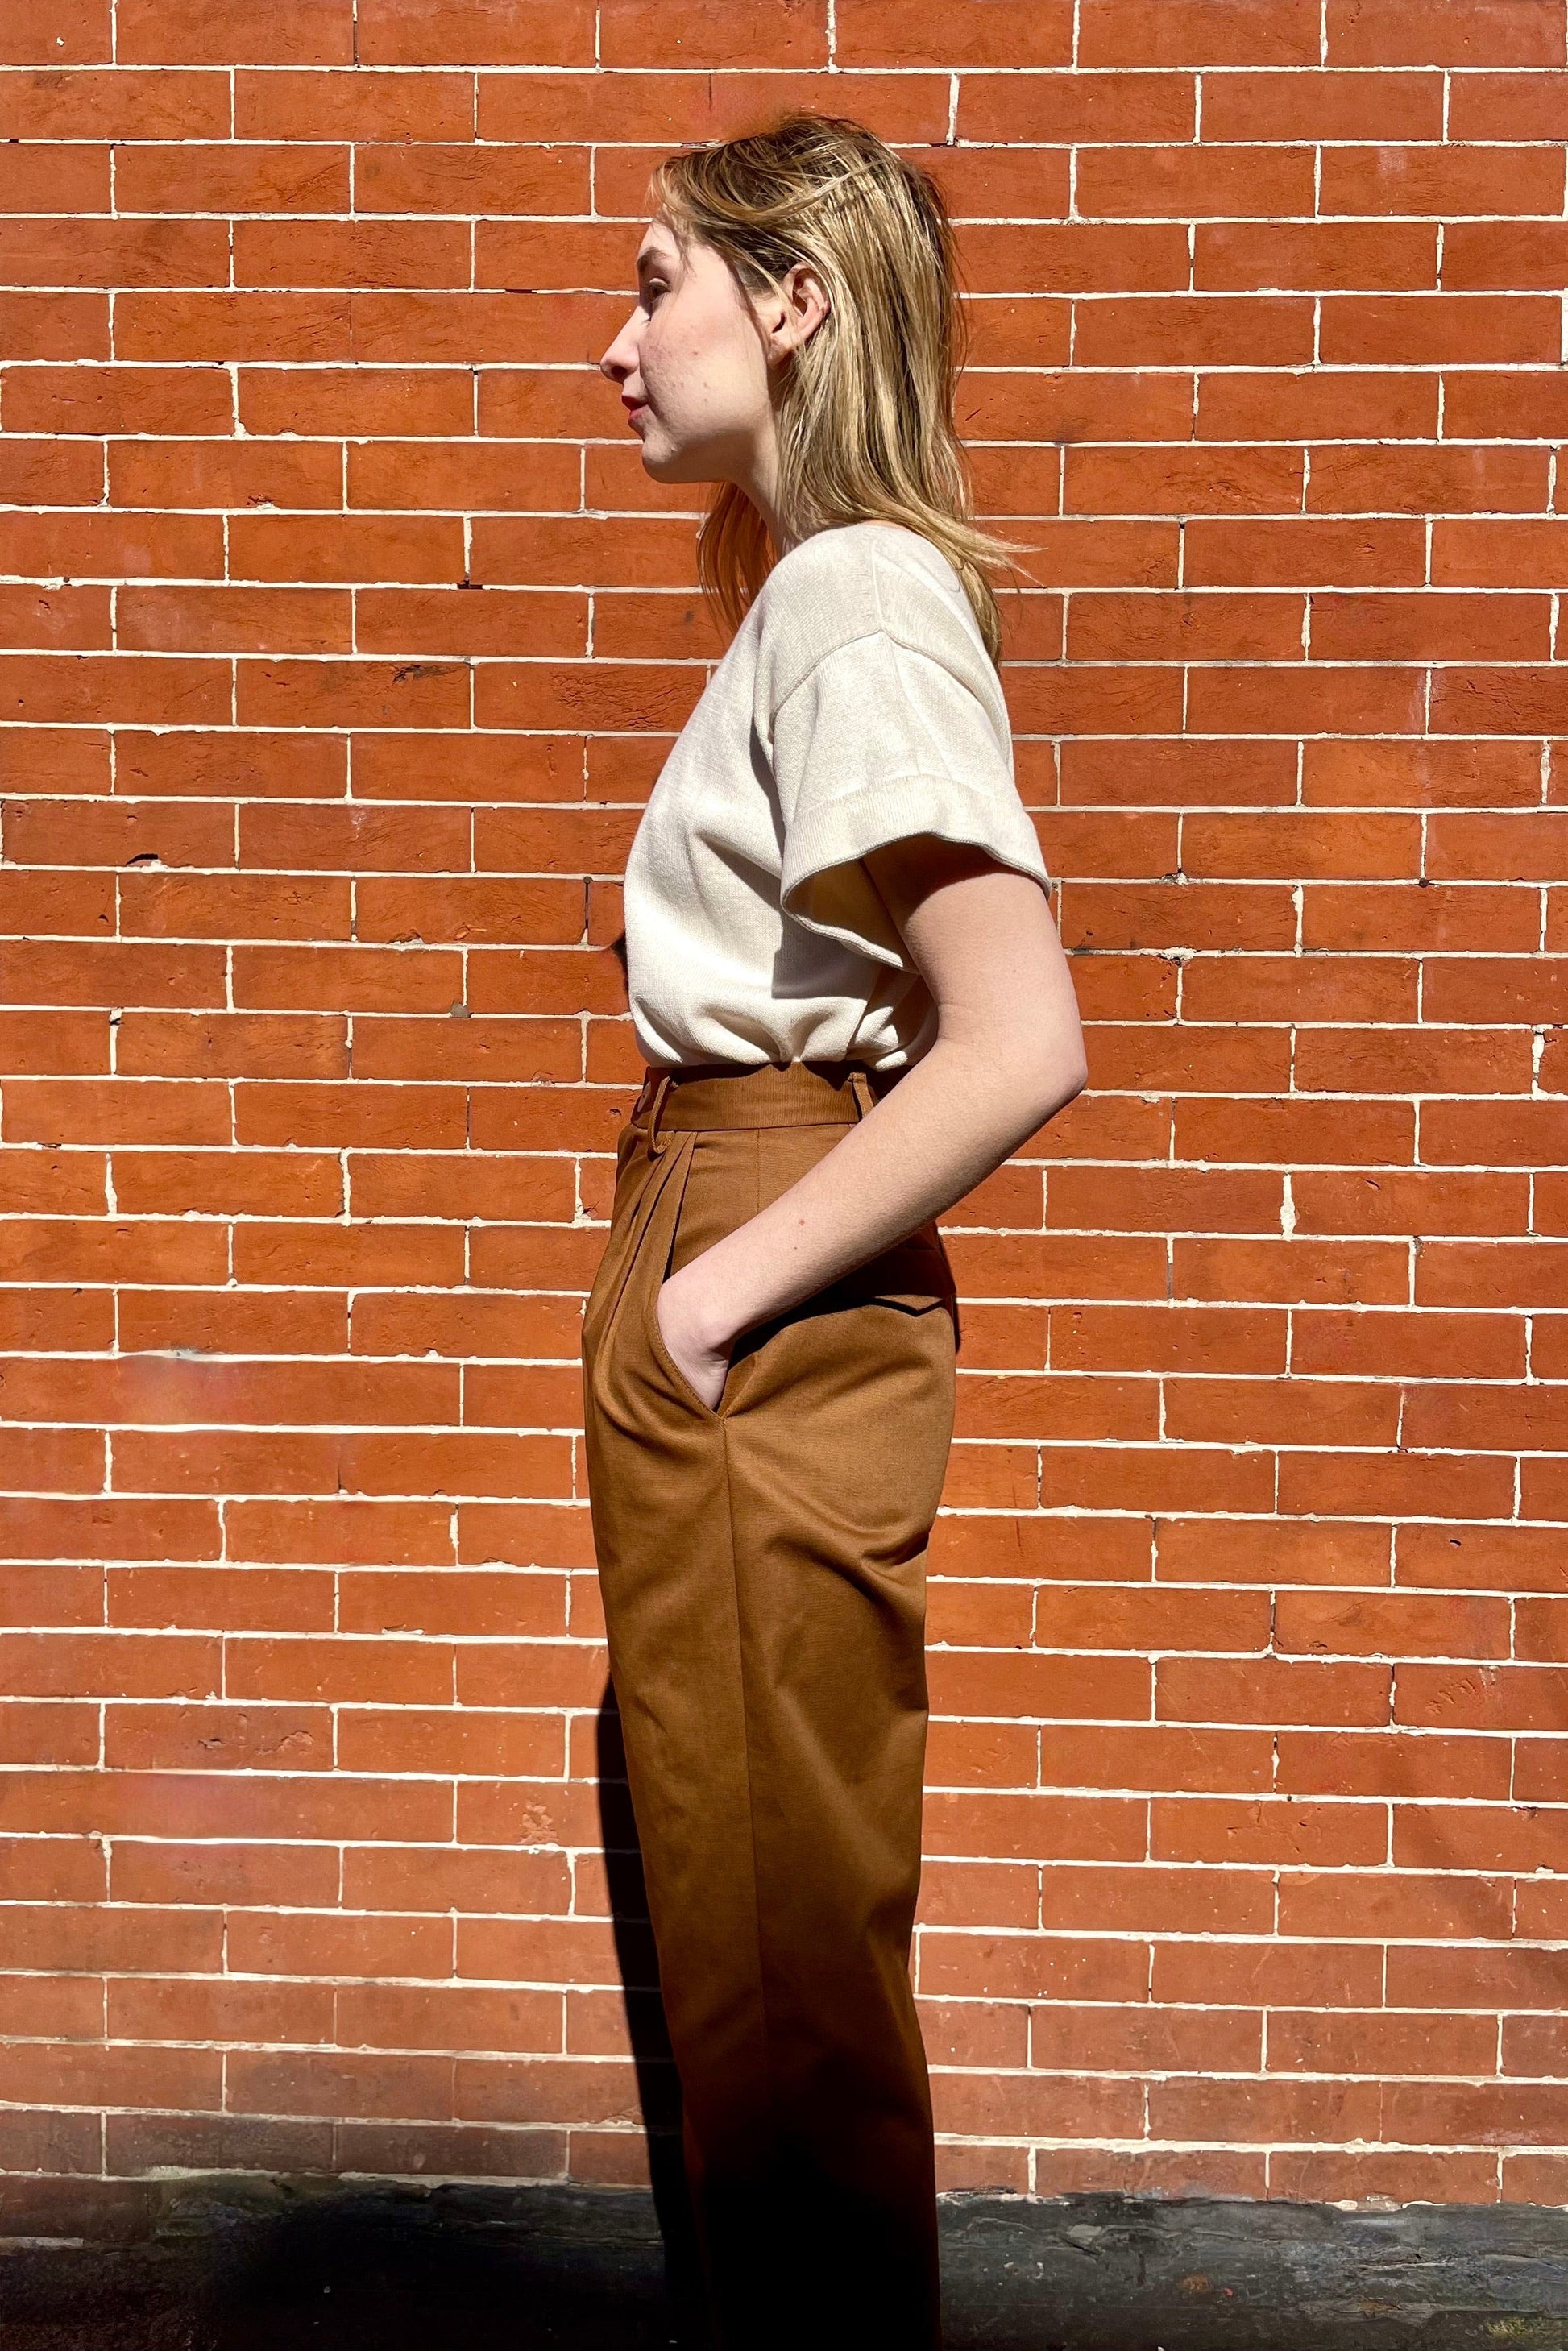 Sophia Pant in Cotton Twill Pant CHRISTINE ALCALAY   